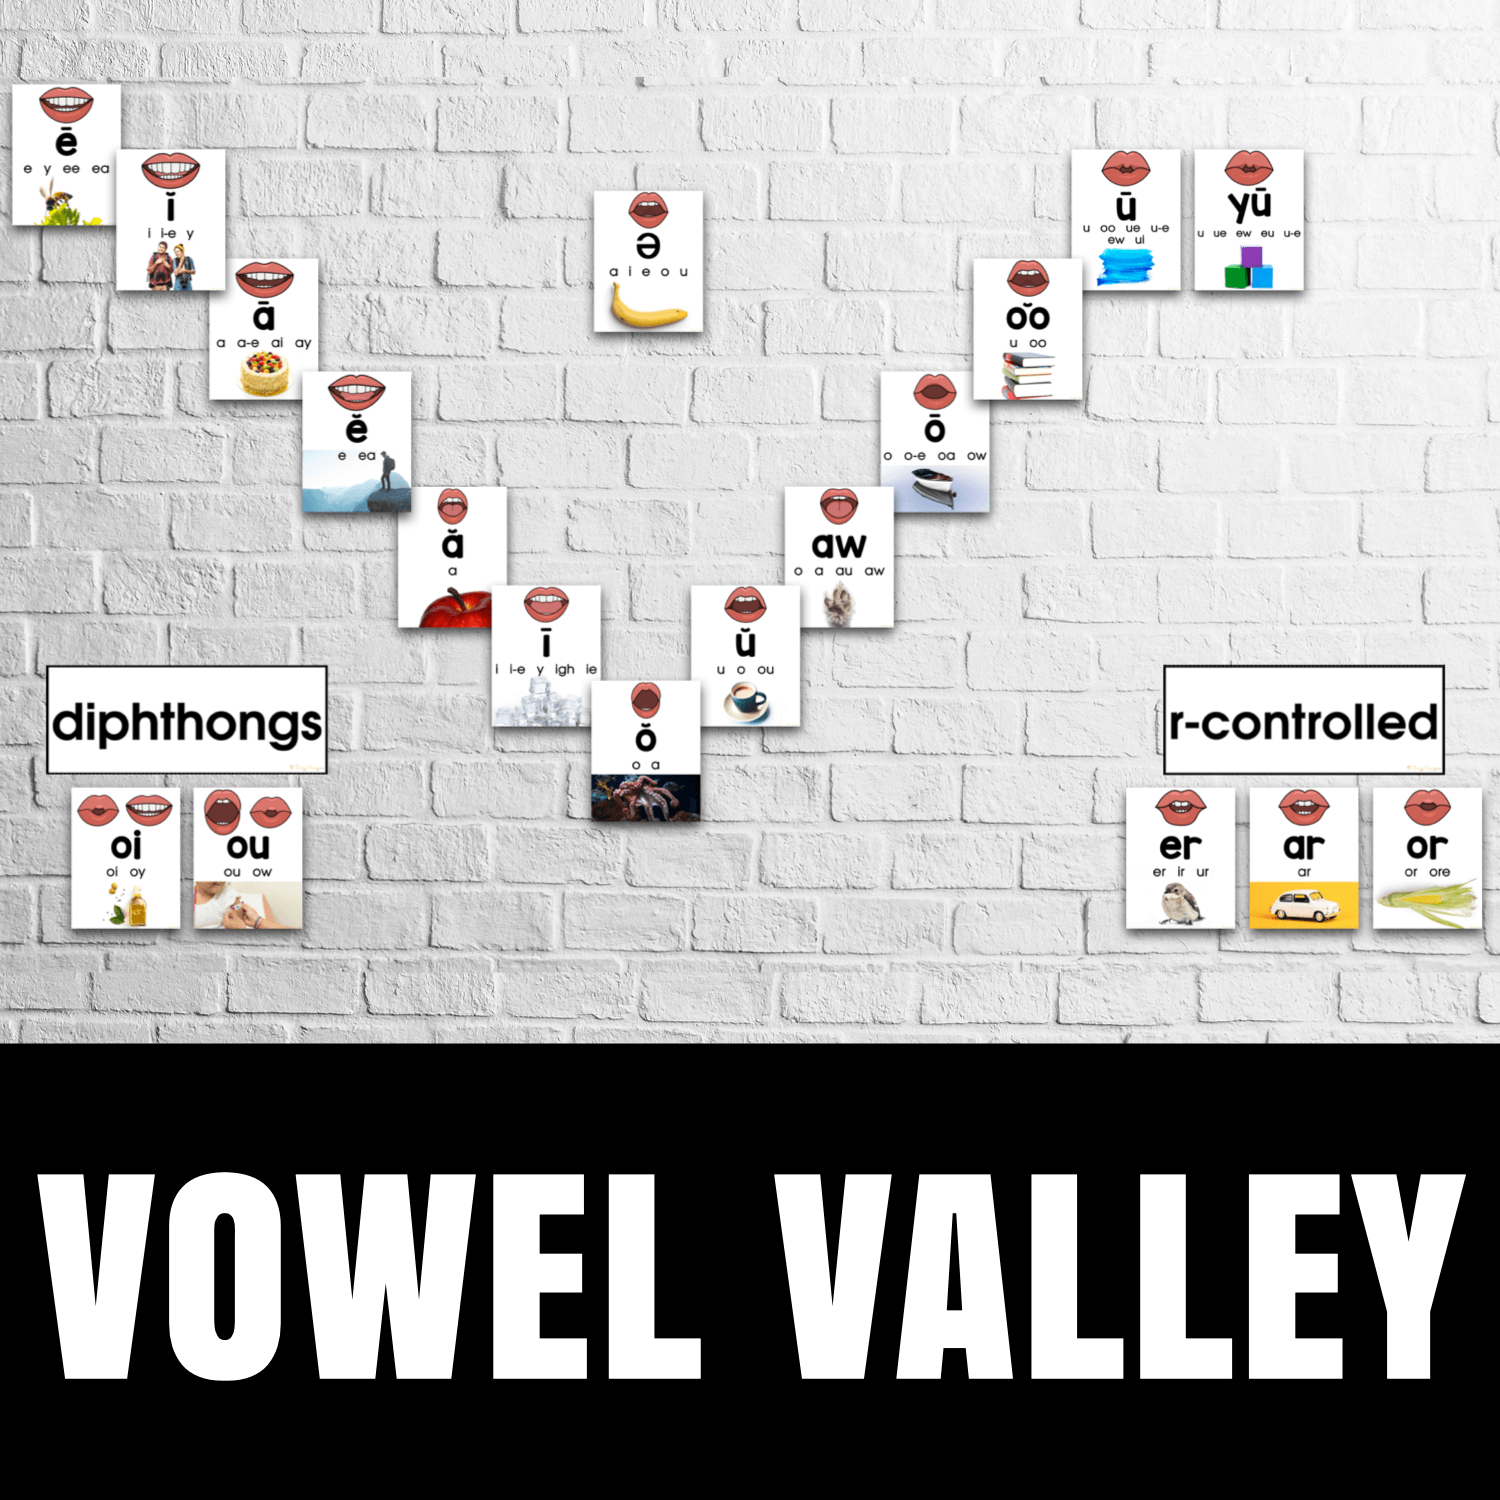 Sound Wall with Mouth Pictures (Vowel Valley)